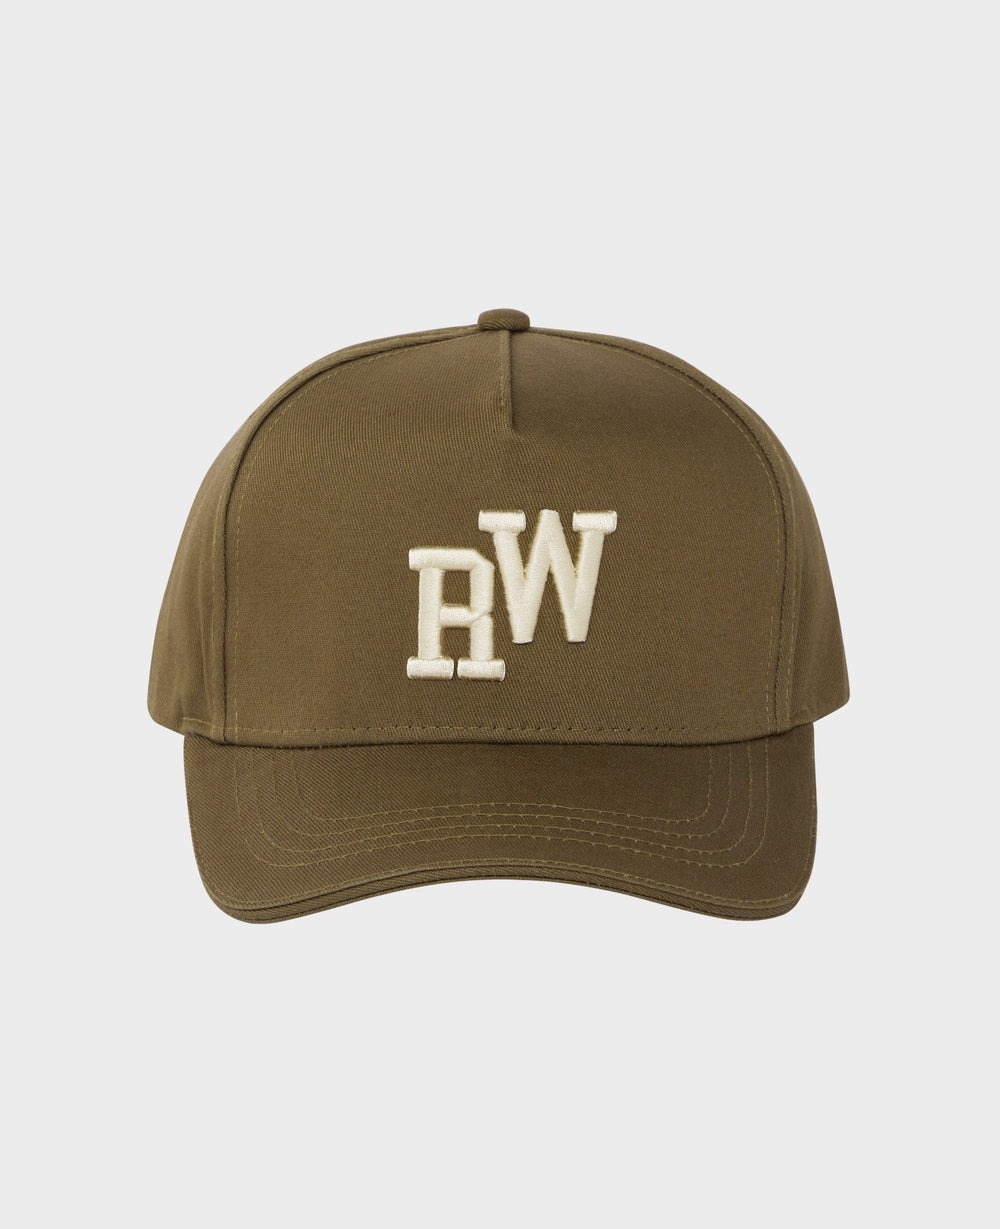 Keep your cool this season with our baseball cap in super chic khaki, featuring an embossed logo on the front and back, an adjustable rear strap and air vent eyelets – all in 100% cotton.